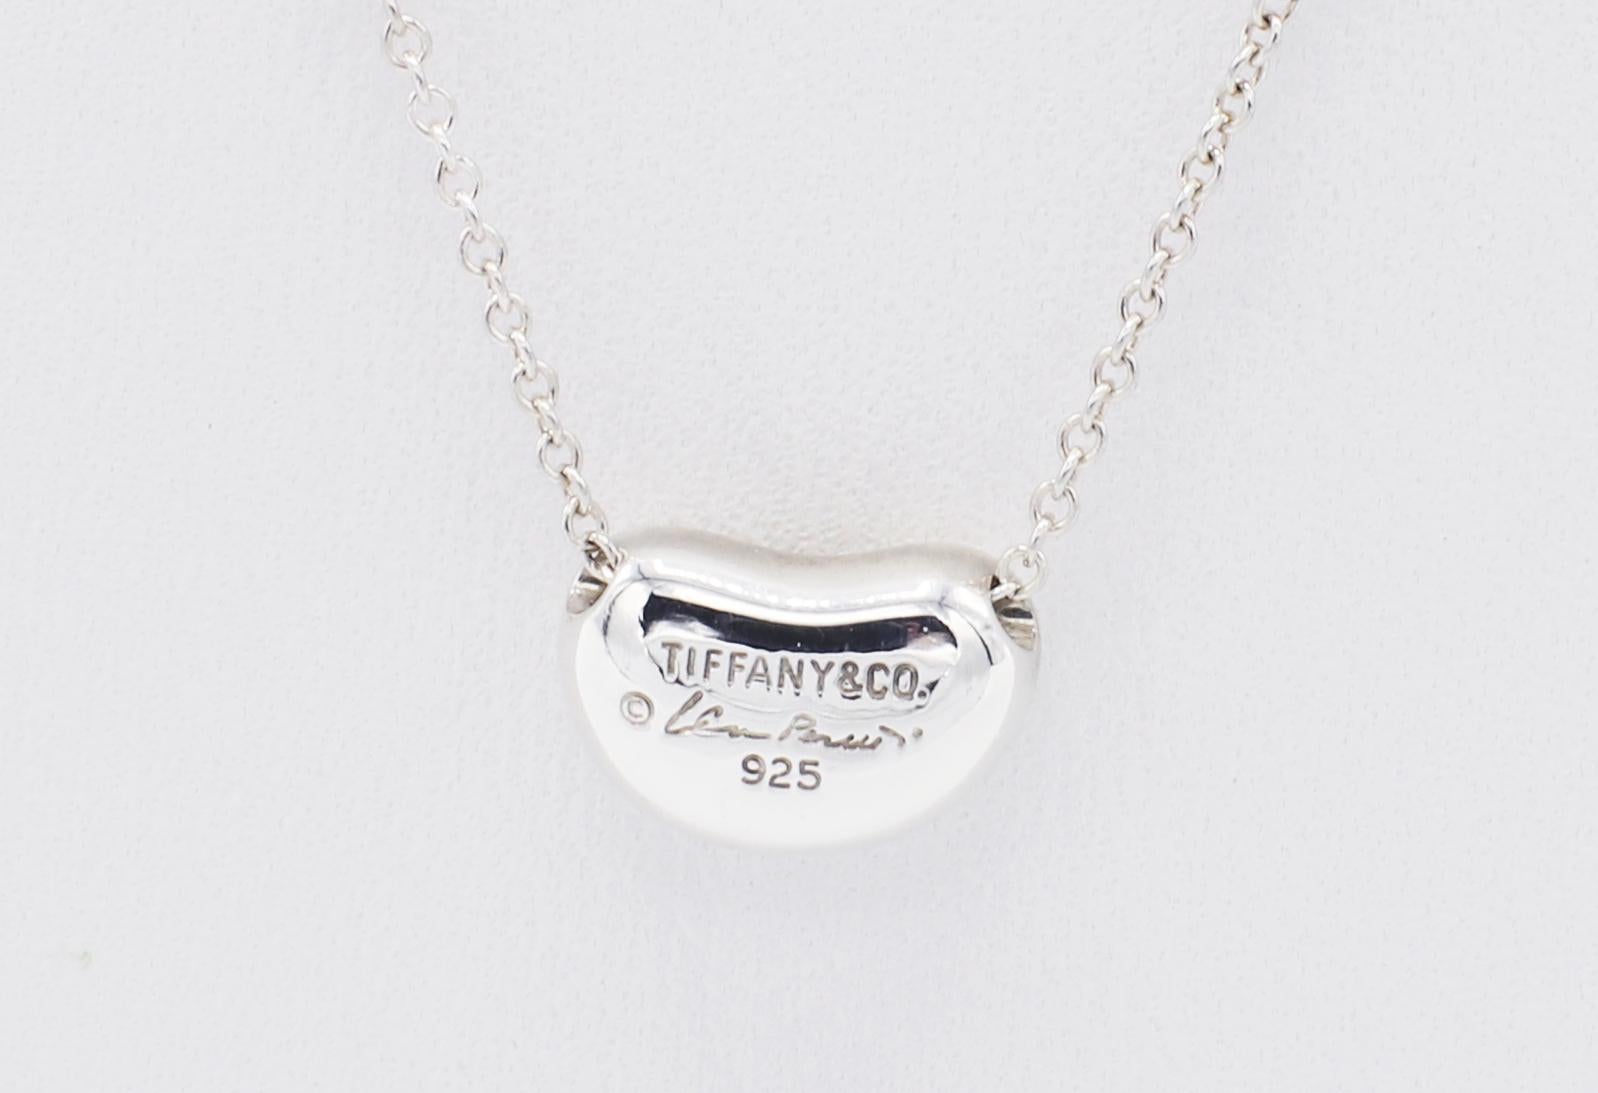 Tiffany & Co. Elsa Peretti Bean Sterling Silver Pendant Necklace 
Metal: Sterling silver, 925
Weight: 3.25 grams
Bean: 10.8 x 7MM
Chain length: 19 inches 
Signed: 